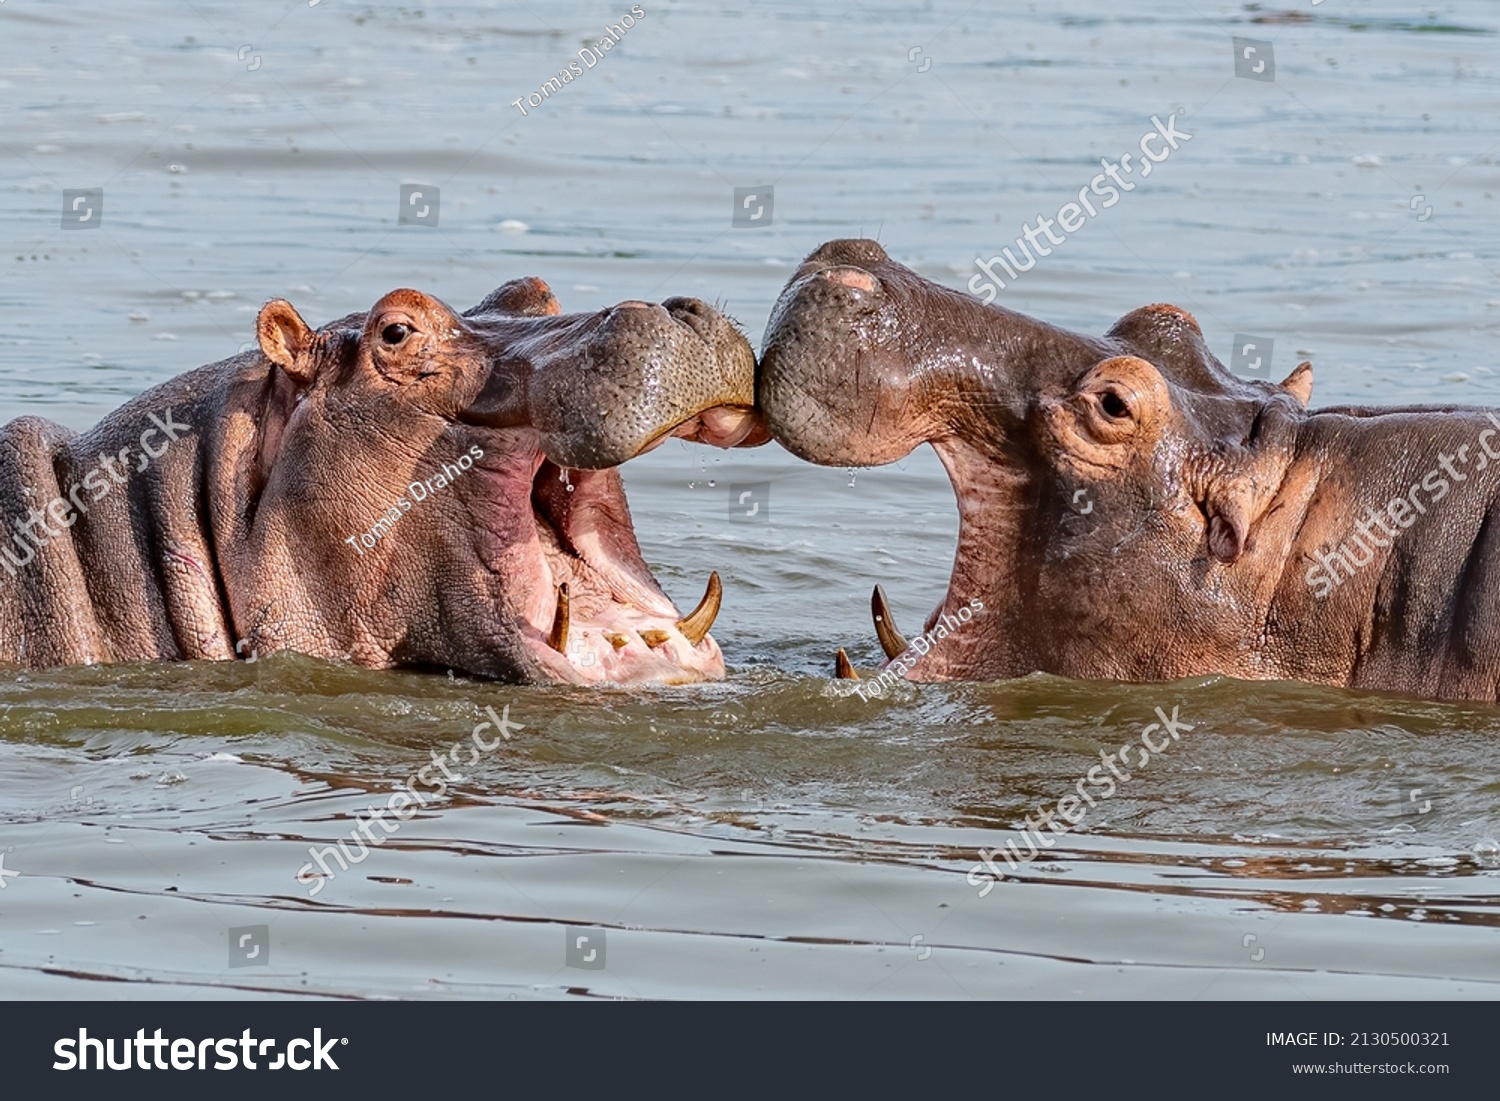 Two young hippopotamus (Hippopotamus amphibius), hippos with a wide open mouth playing in Queen Elizabeth National Park, Uganda, Africa #2130500321